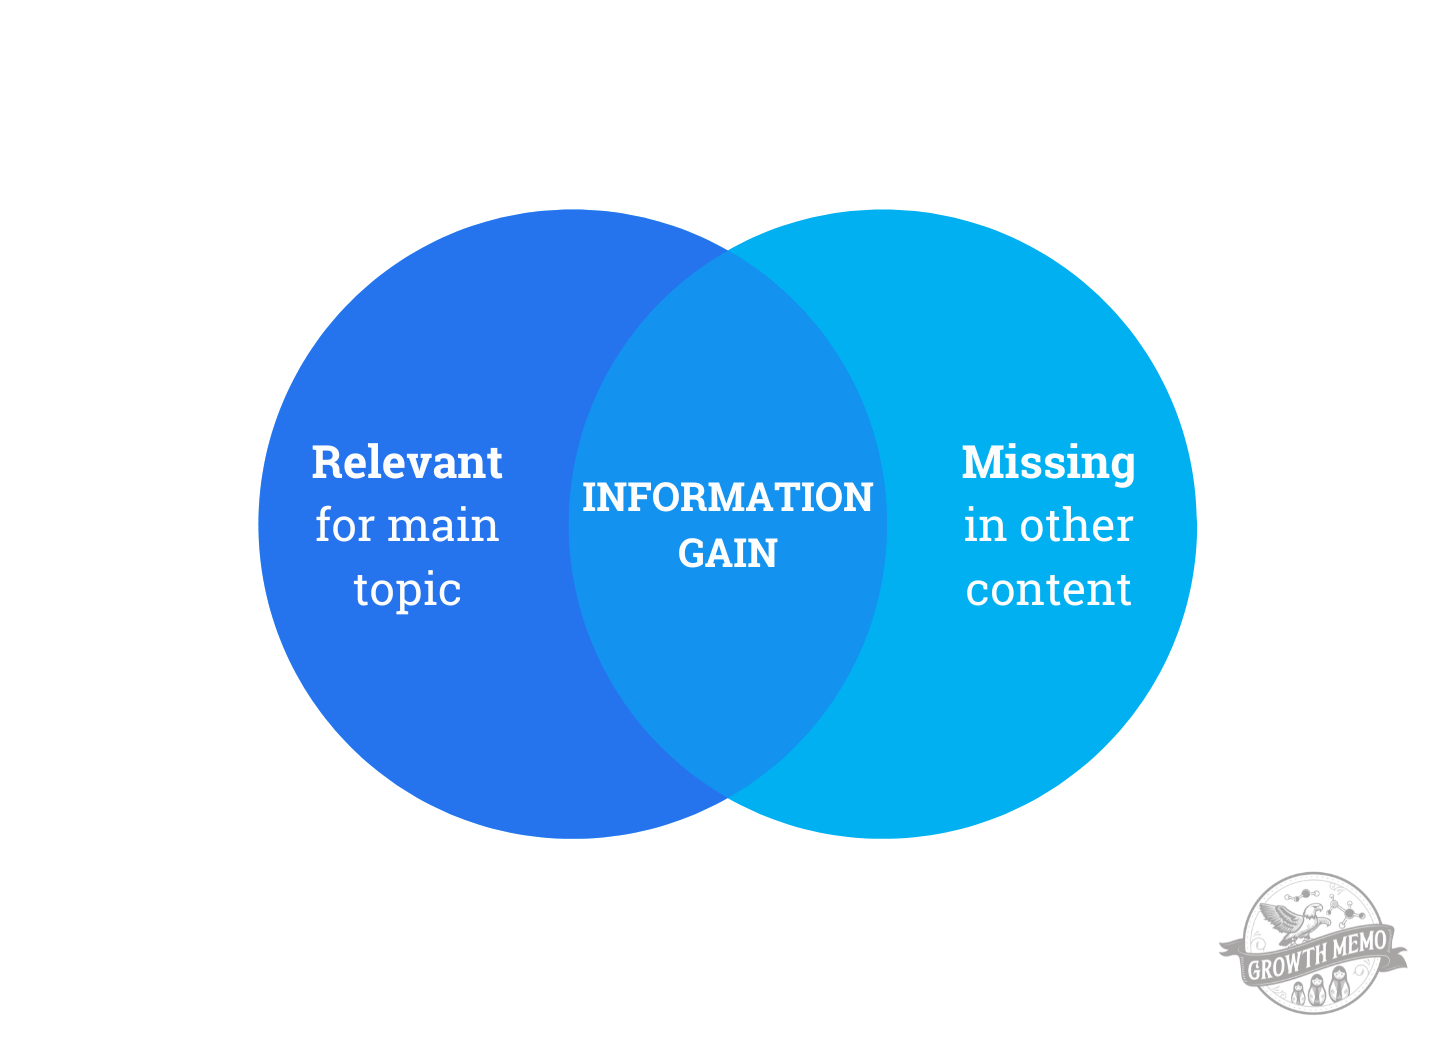 A venn diagram with two overlapping circles labeled "relevant for main topic" and "missing in other content," intersecting on a section labeled "information gain."